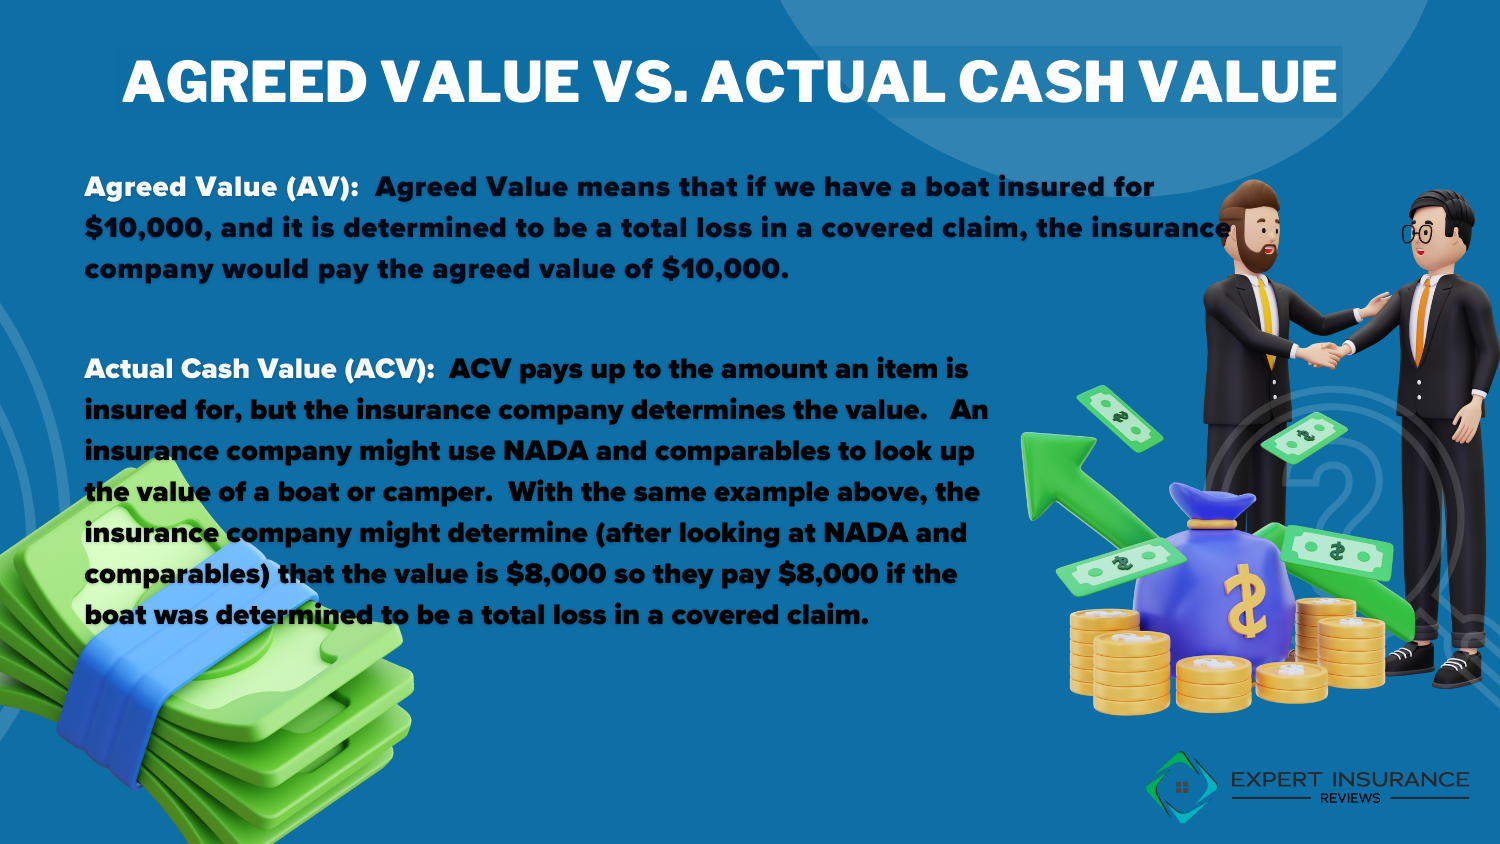 How do I track the progress of my State Farm car insurance claim?: Agreed Value vs. Actual Cash Value Definition Card